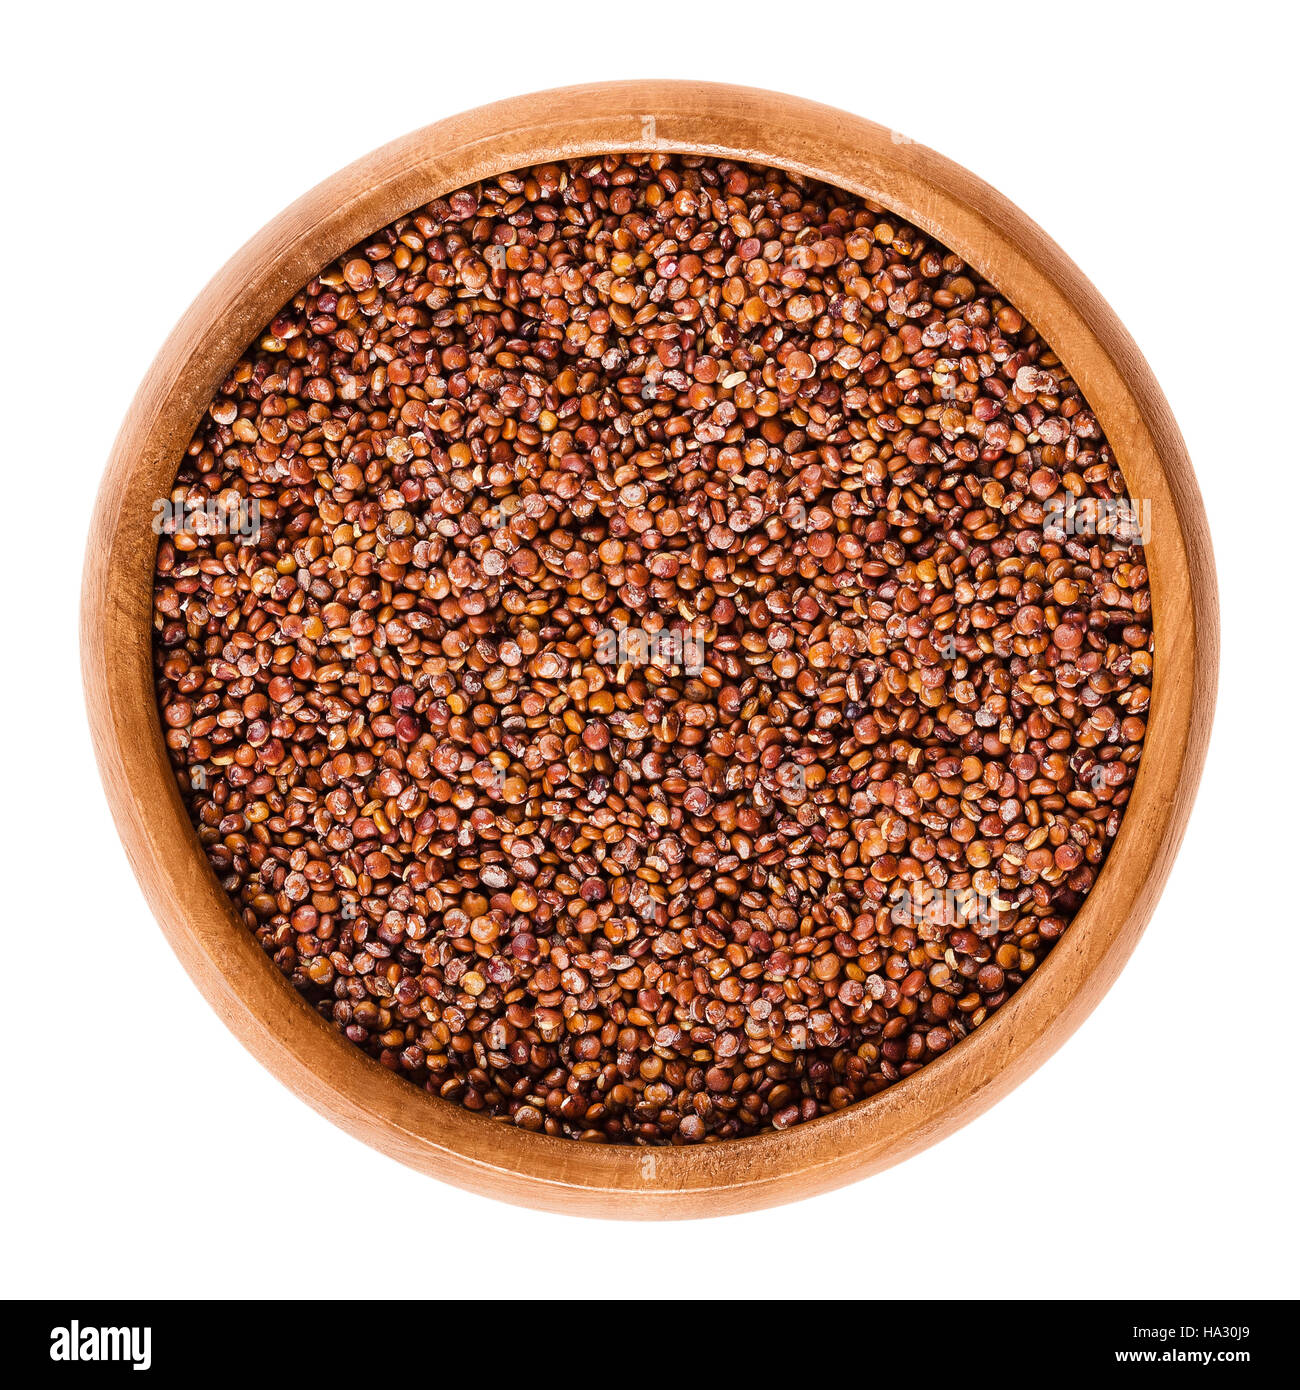 Red quinoa seeds in wooden bowl. Edible fruits of the grain crop Chenopodium quinoa in the Amaranth family is a pseudocereal. Stock Photo